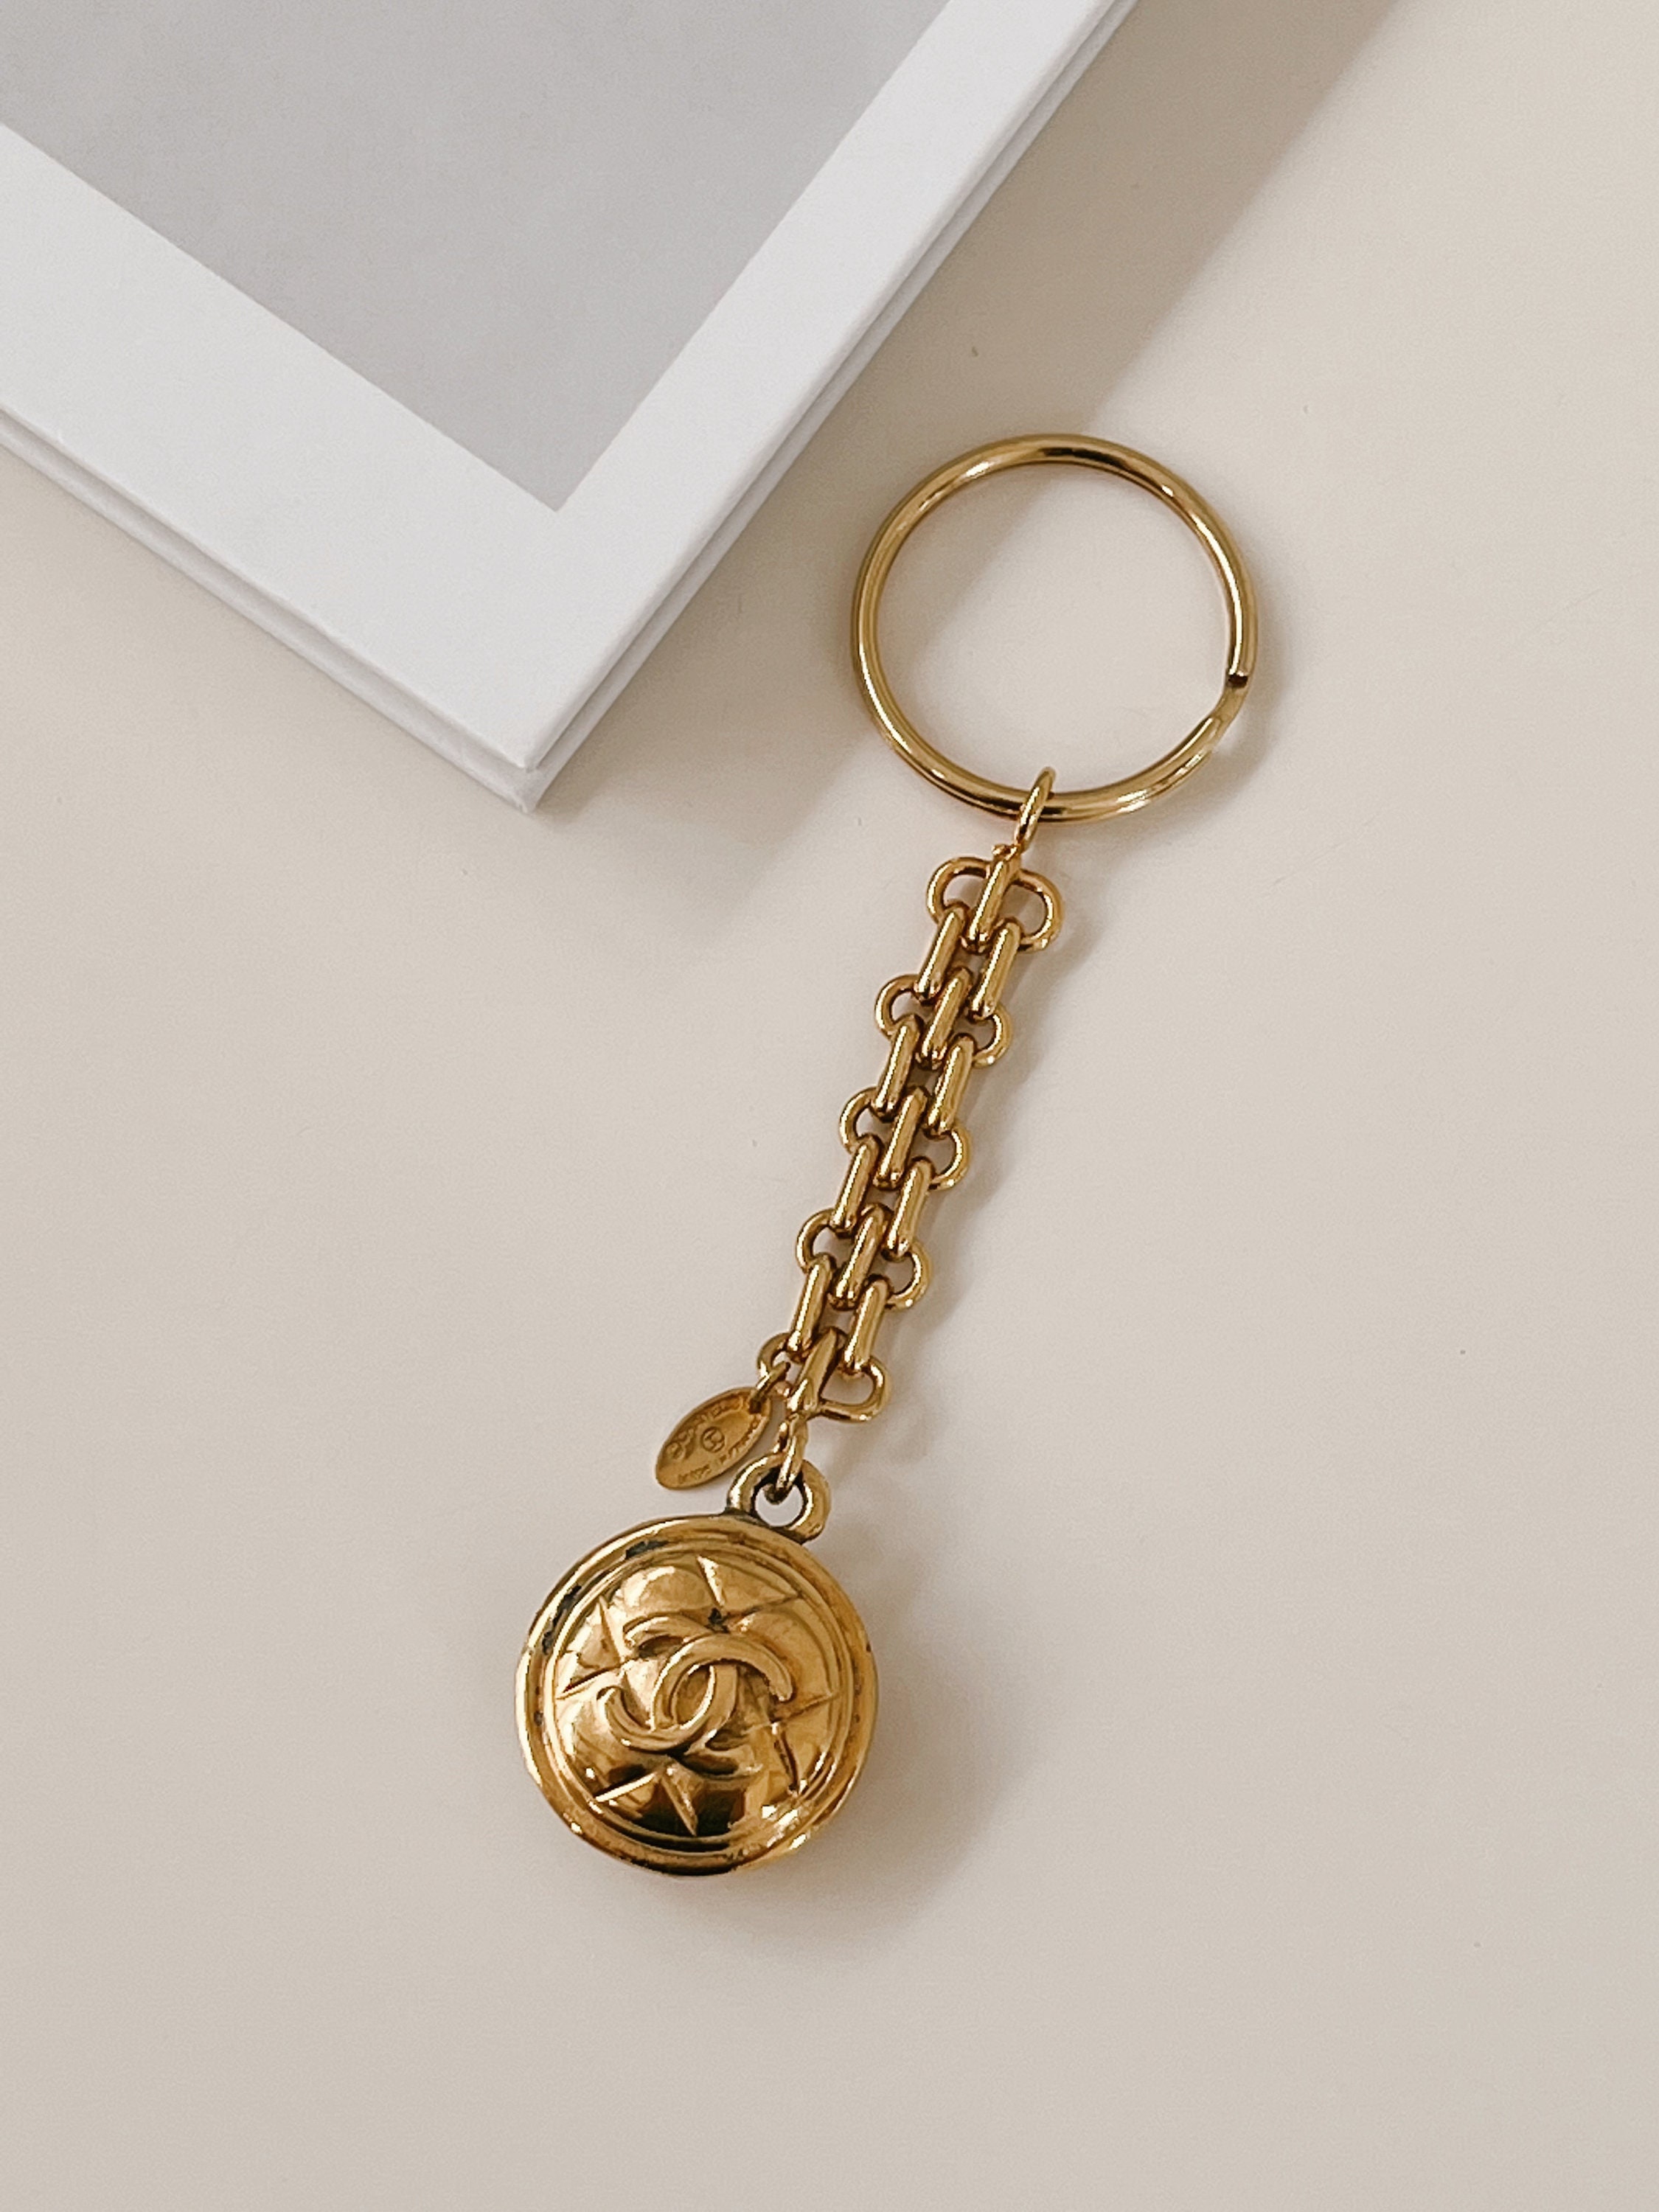 CHANEL Key Ring Chain Holder Bag Charm Coco Gold CC Vintage Authentic RARE